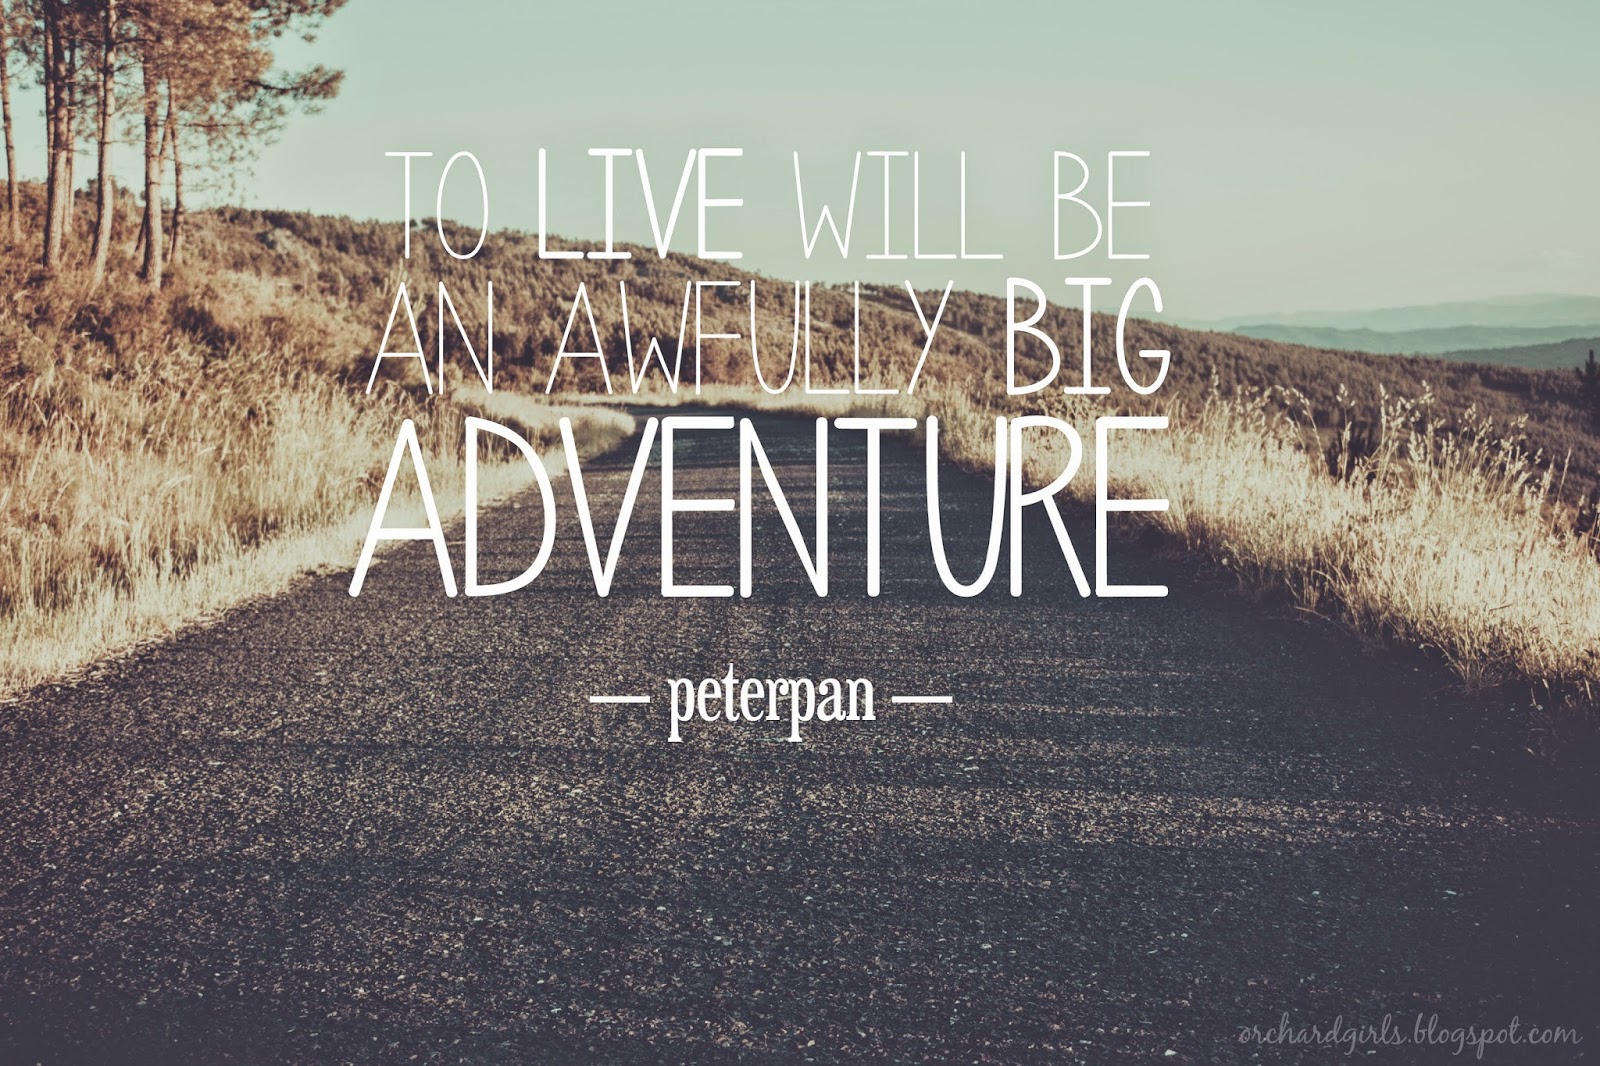 To live will be an awfully big adventure - Peterpan